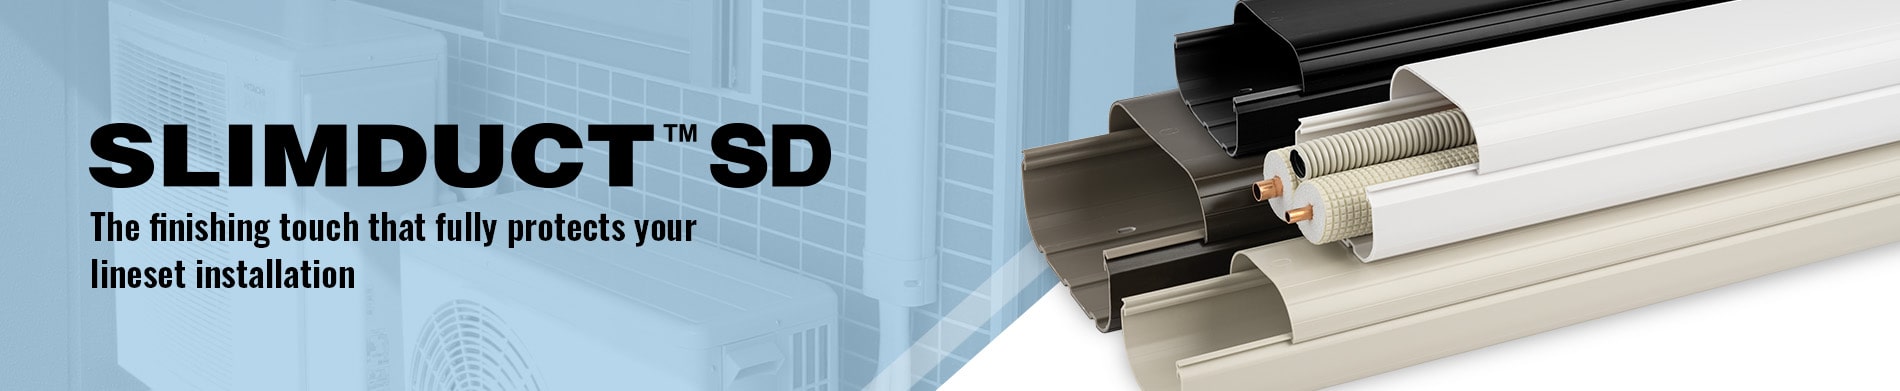 SLIMDUCT SD | The finishing touch that fully protects your lineset installation